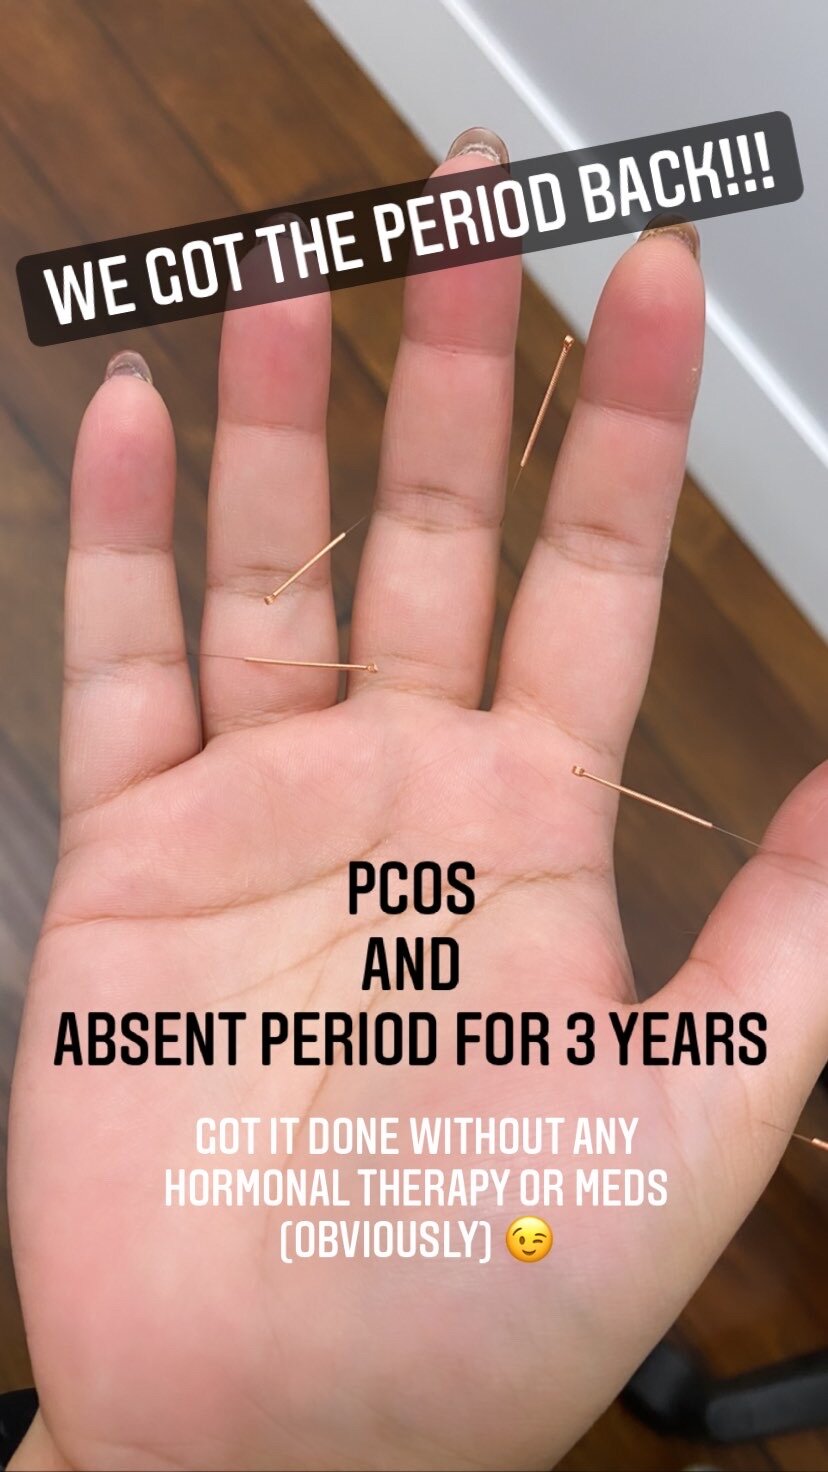  SuJok acupuncture treatment based in Vancouver Canada at Alla Ozerova Acupuncture Clinic used to treat patient with absent period for 3 years and PCOS.  Period came back after acupuncture treatment with no medication or hormones.  